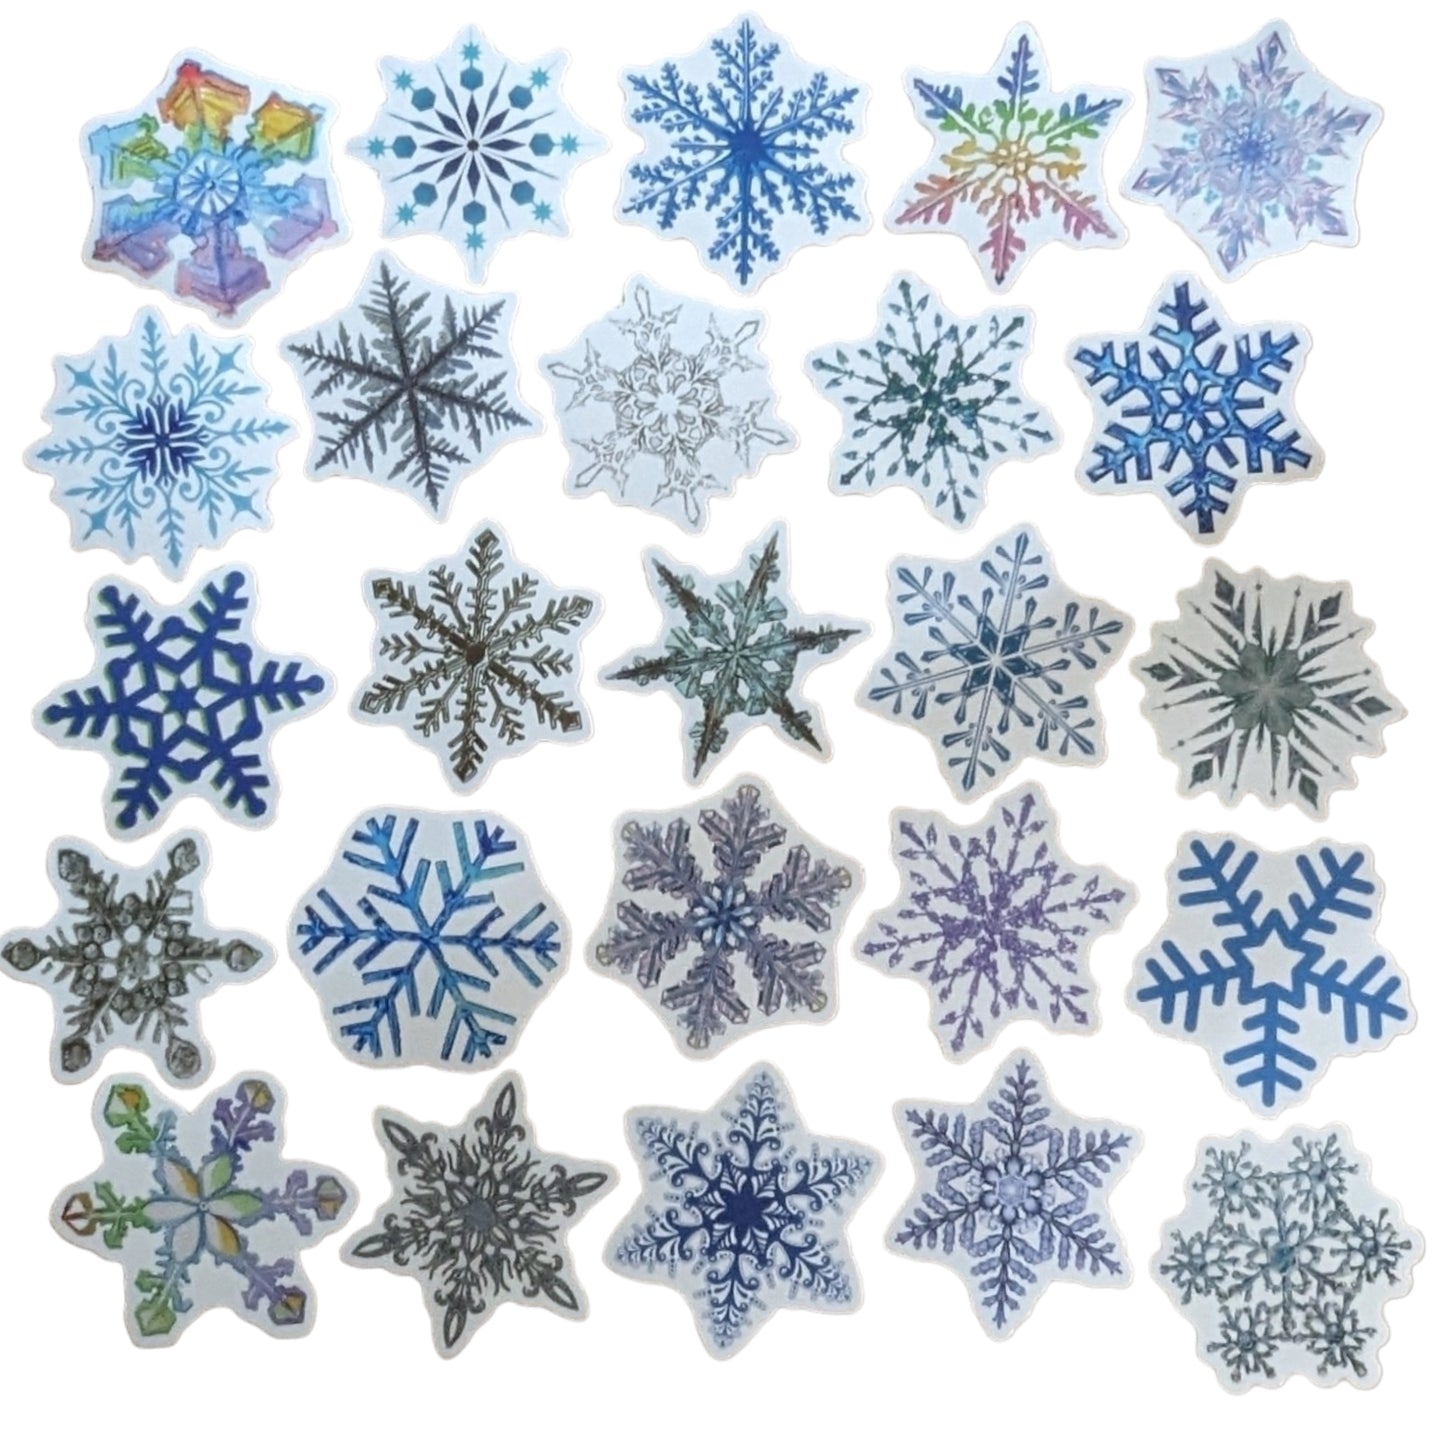 STICKER PACK - Pack #27 - 25 Pieces - Snowflakes